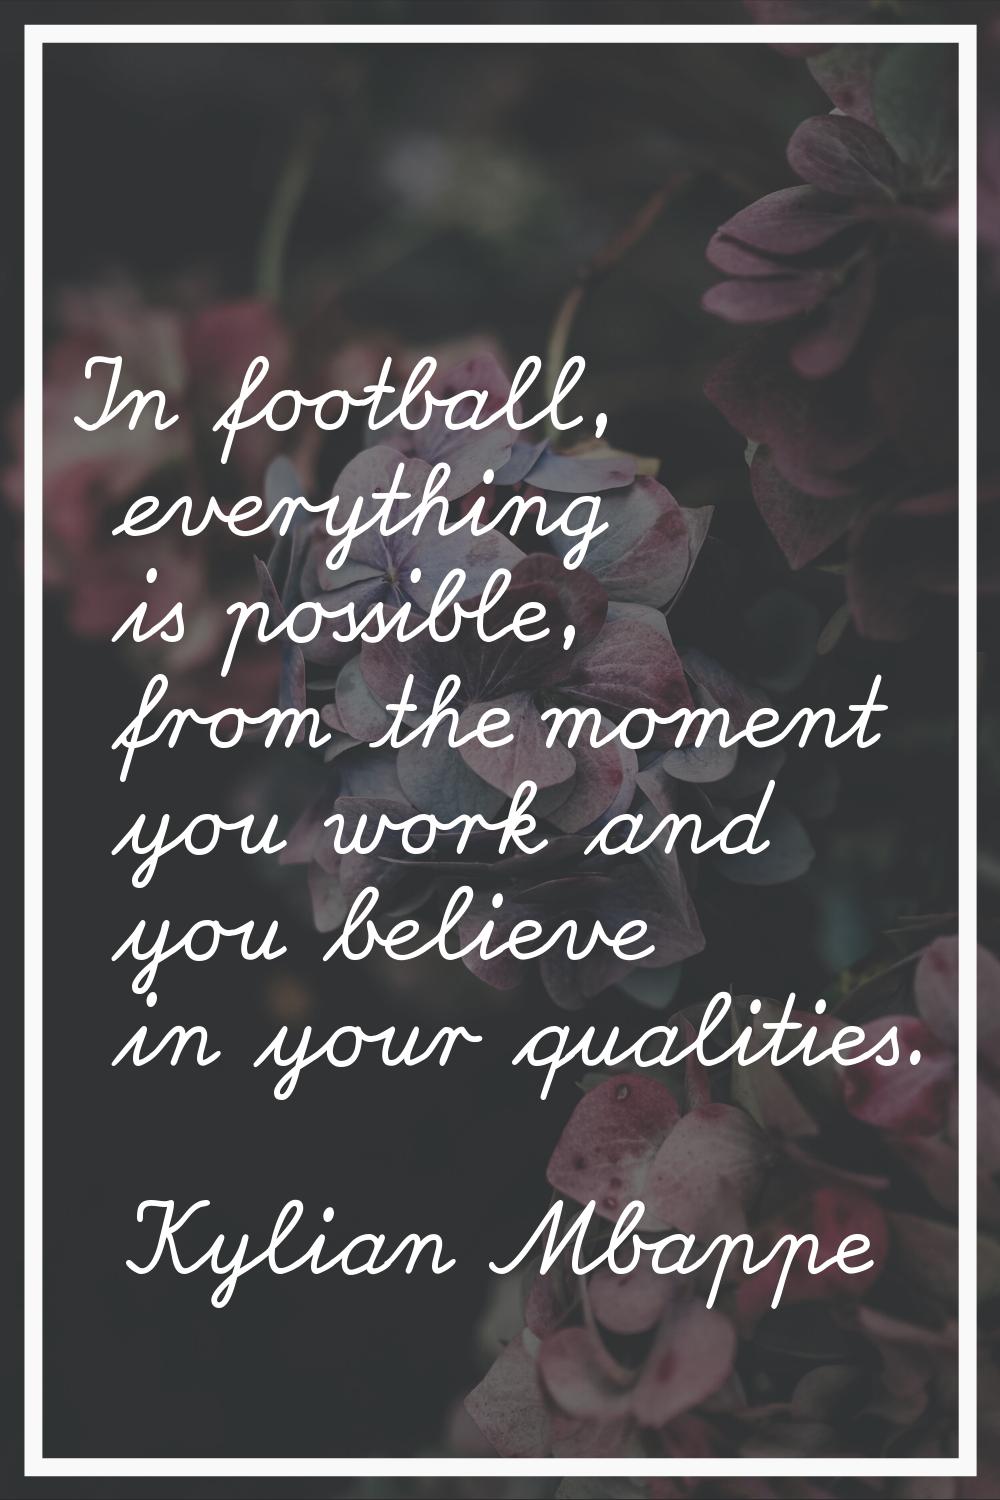 In football, everything is possible, from the moment you work and you believe in your qualities.